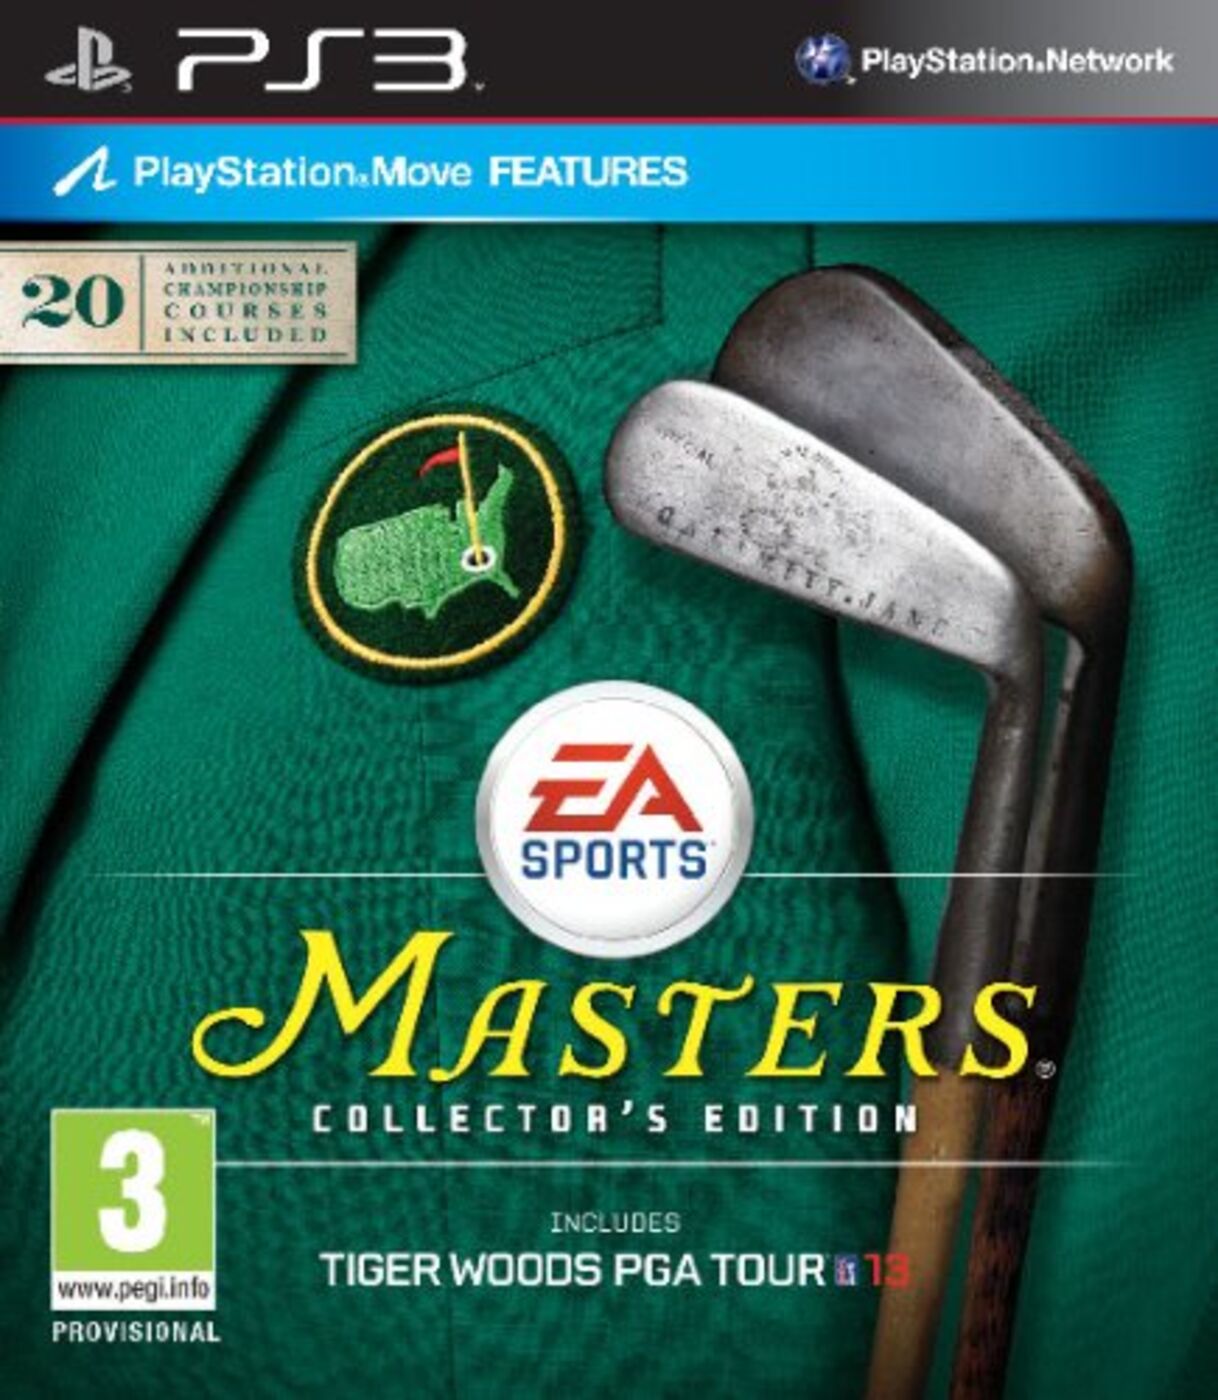 tiger woods pga tour 13 masters collector's edition